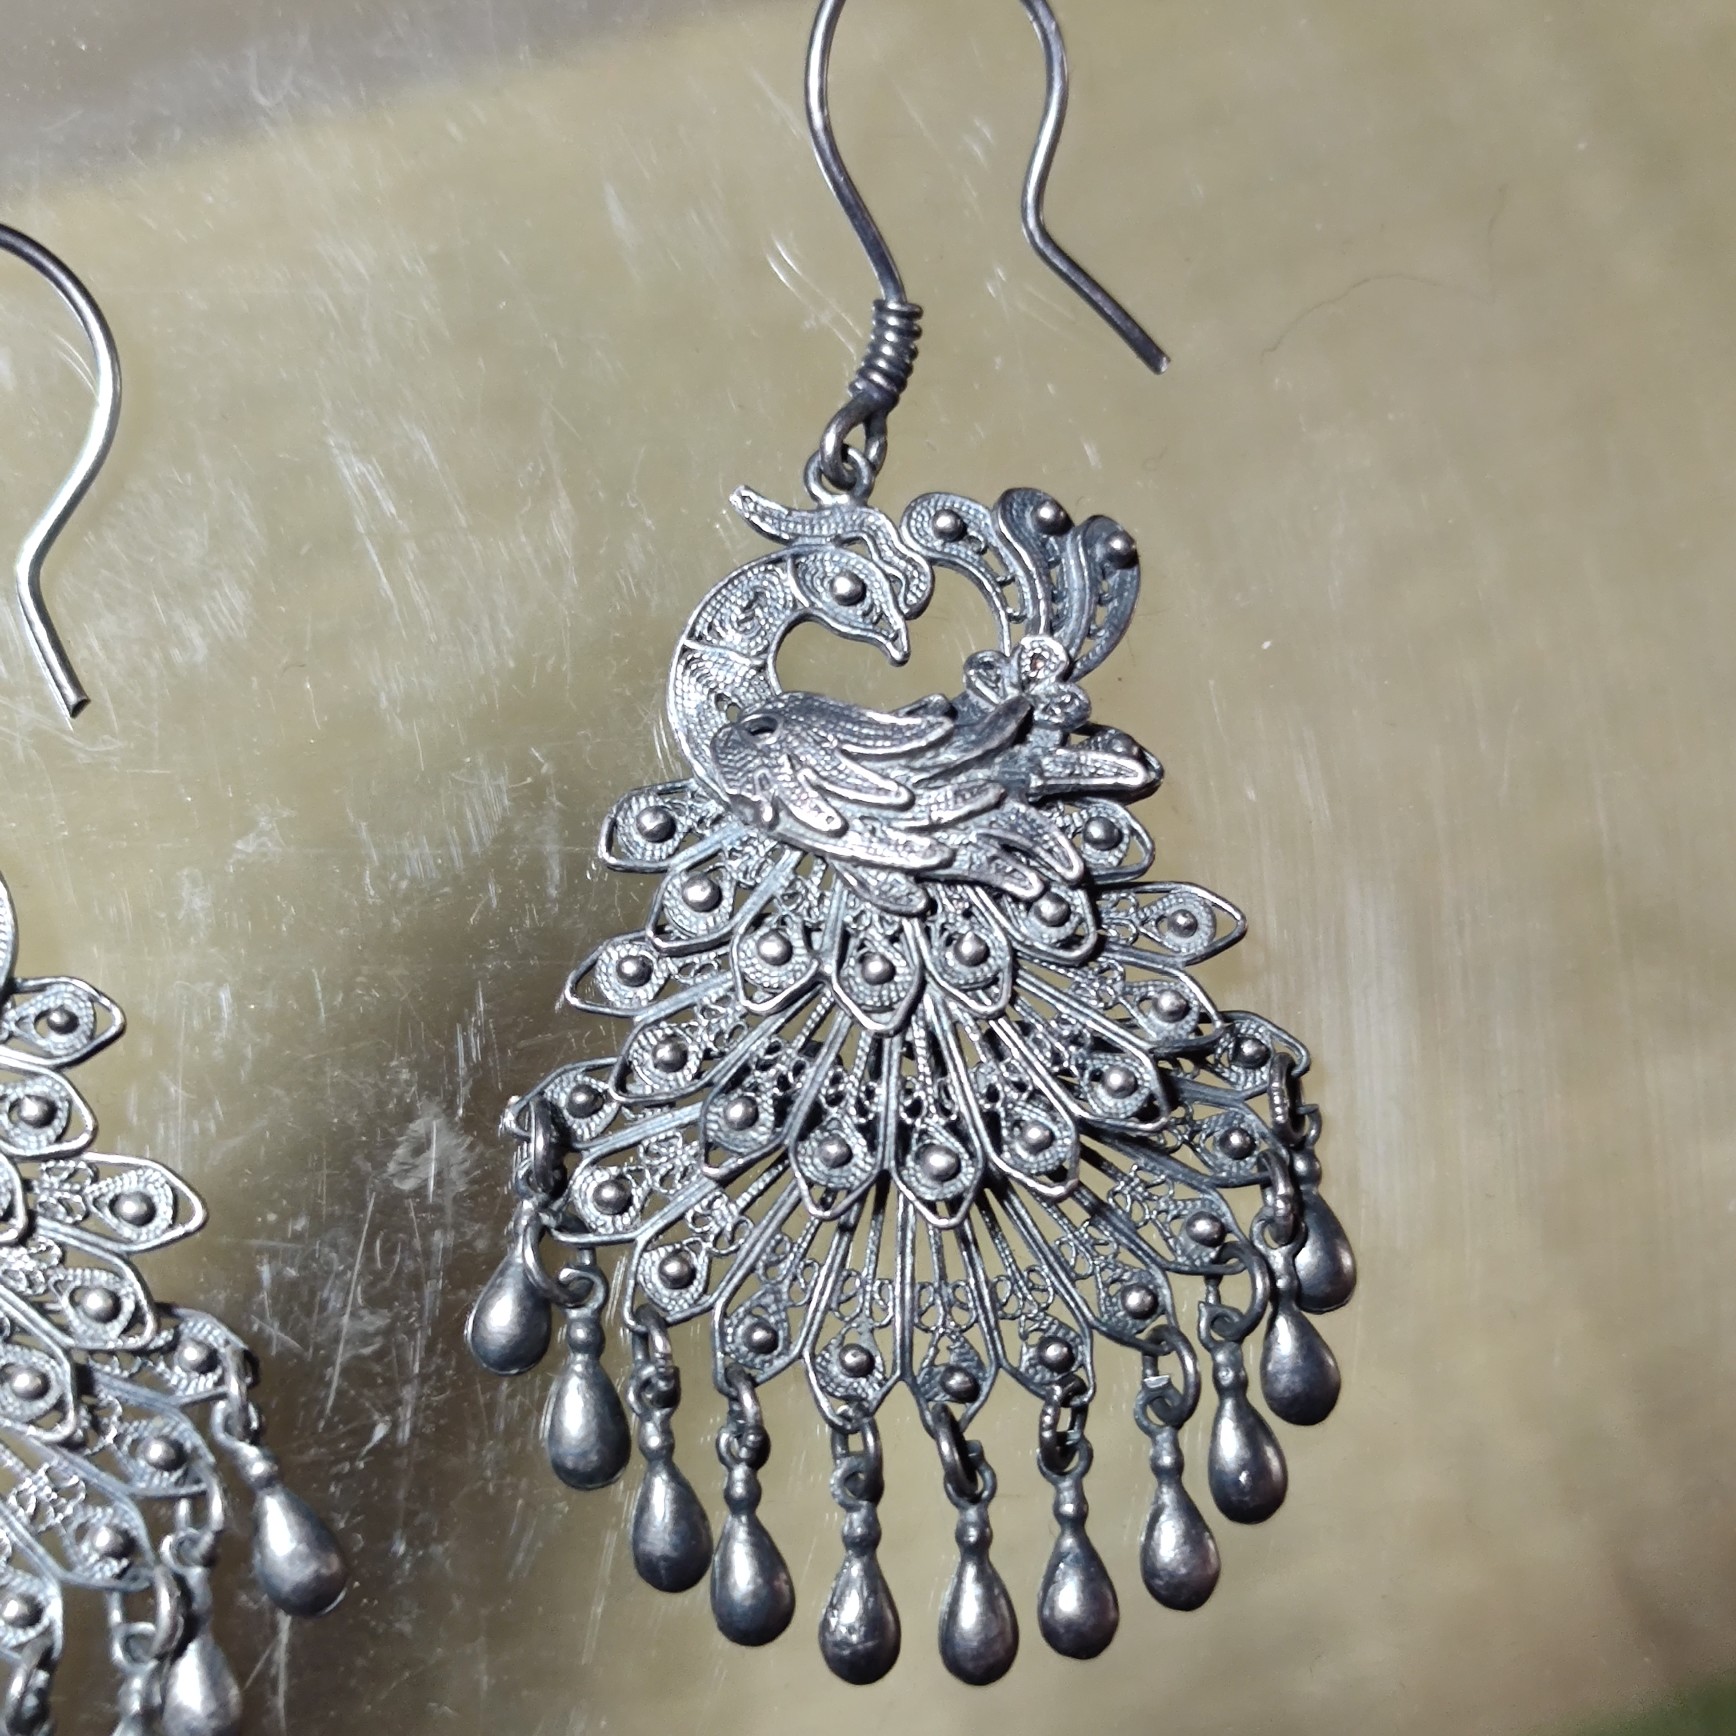 A pair of Qing Dynasty silver earrings - Image 2 of 5